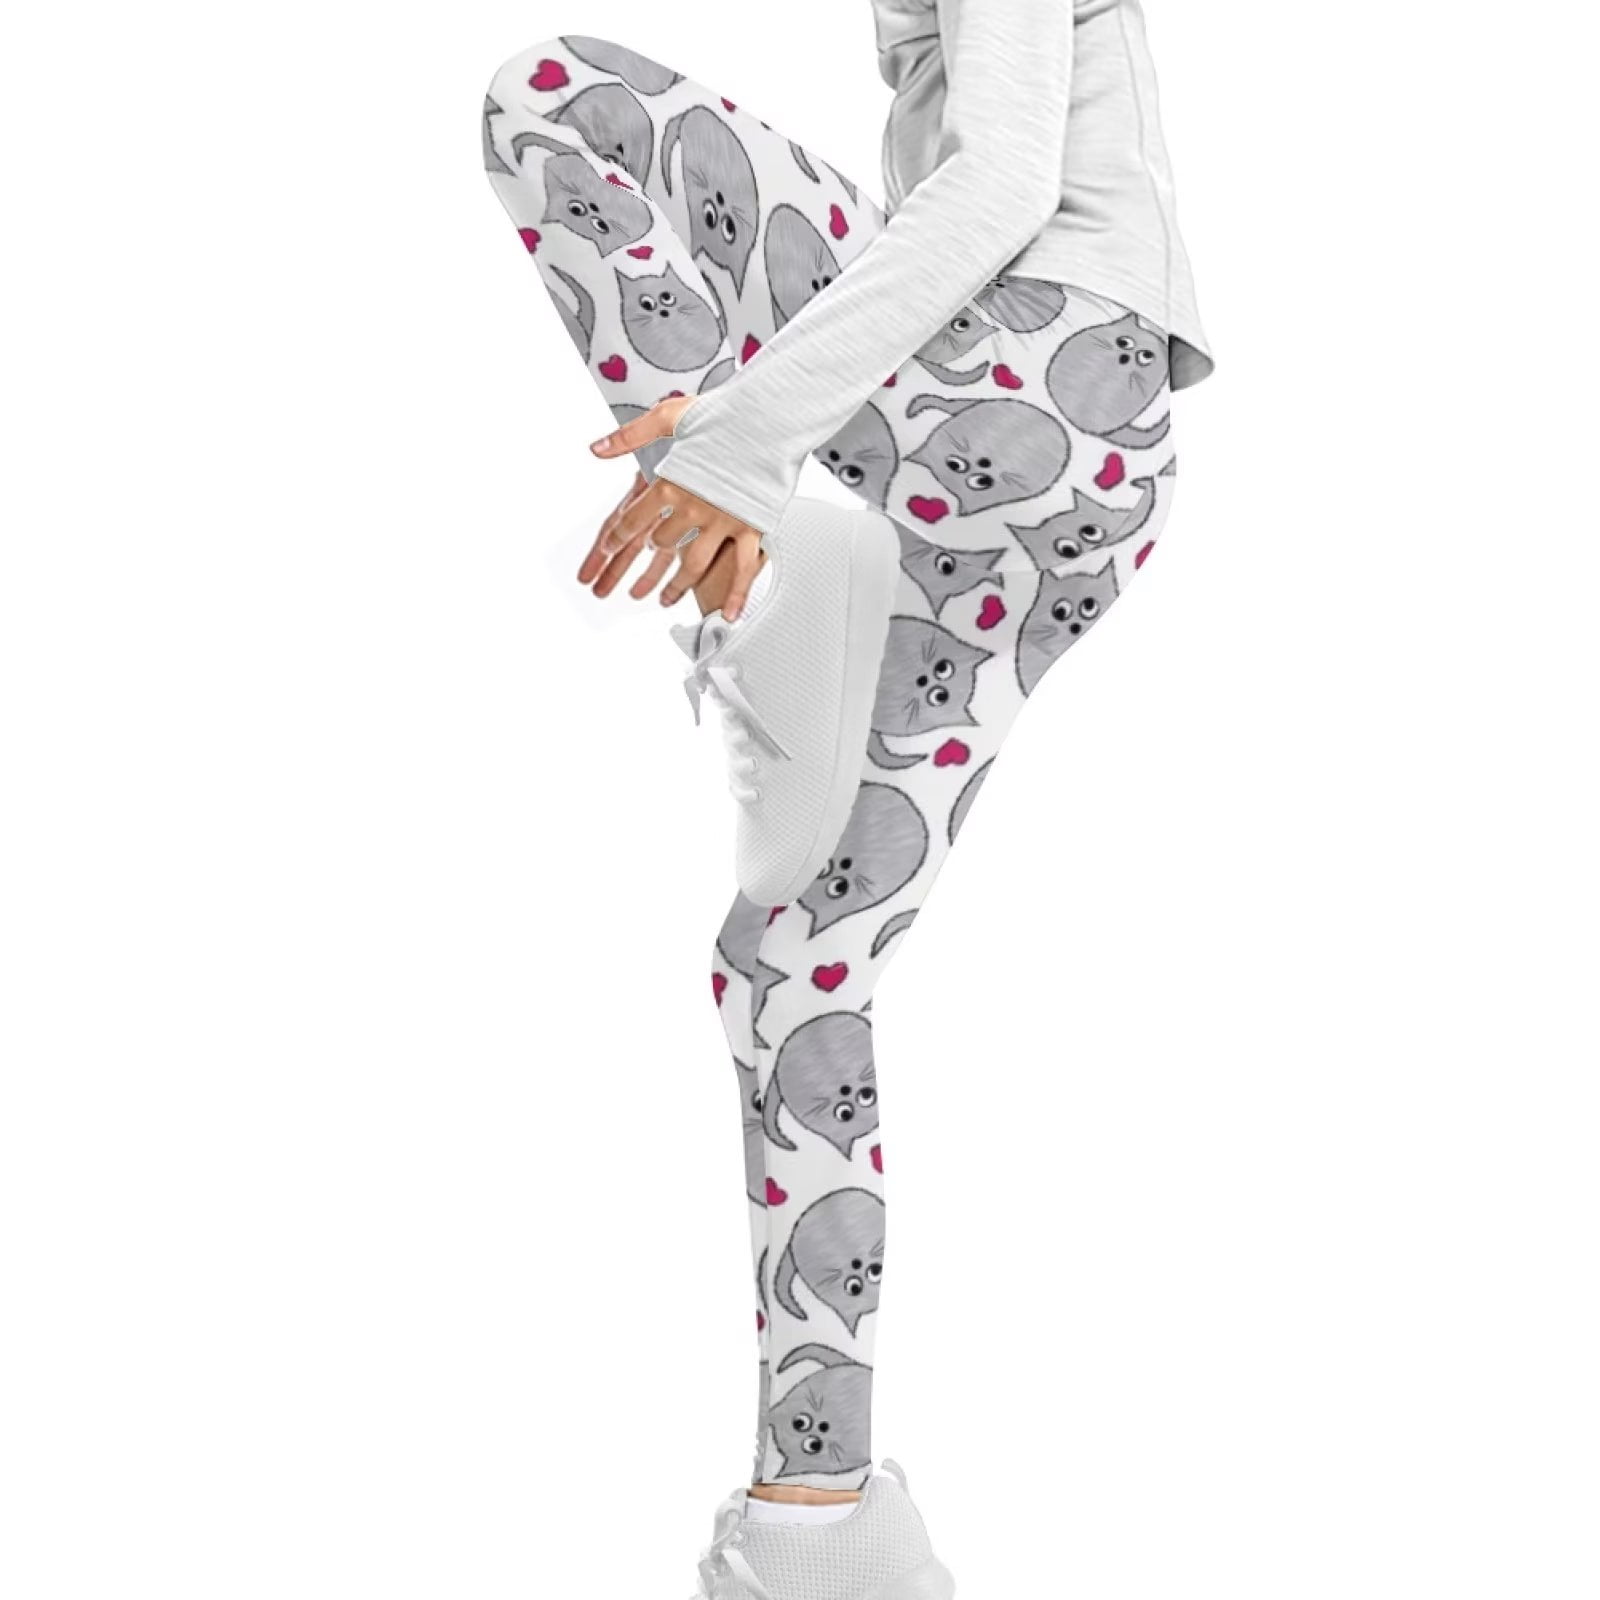 Flamingo All-over Print Cute Kids Yoga Leggings Sizes 6 6X Girls'  Activewear Comfy Stretchy Leggings Perfect Gift 